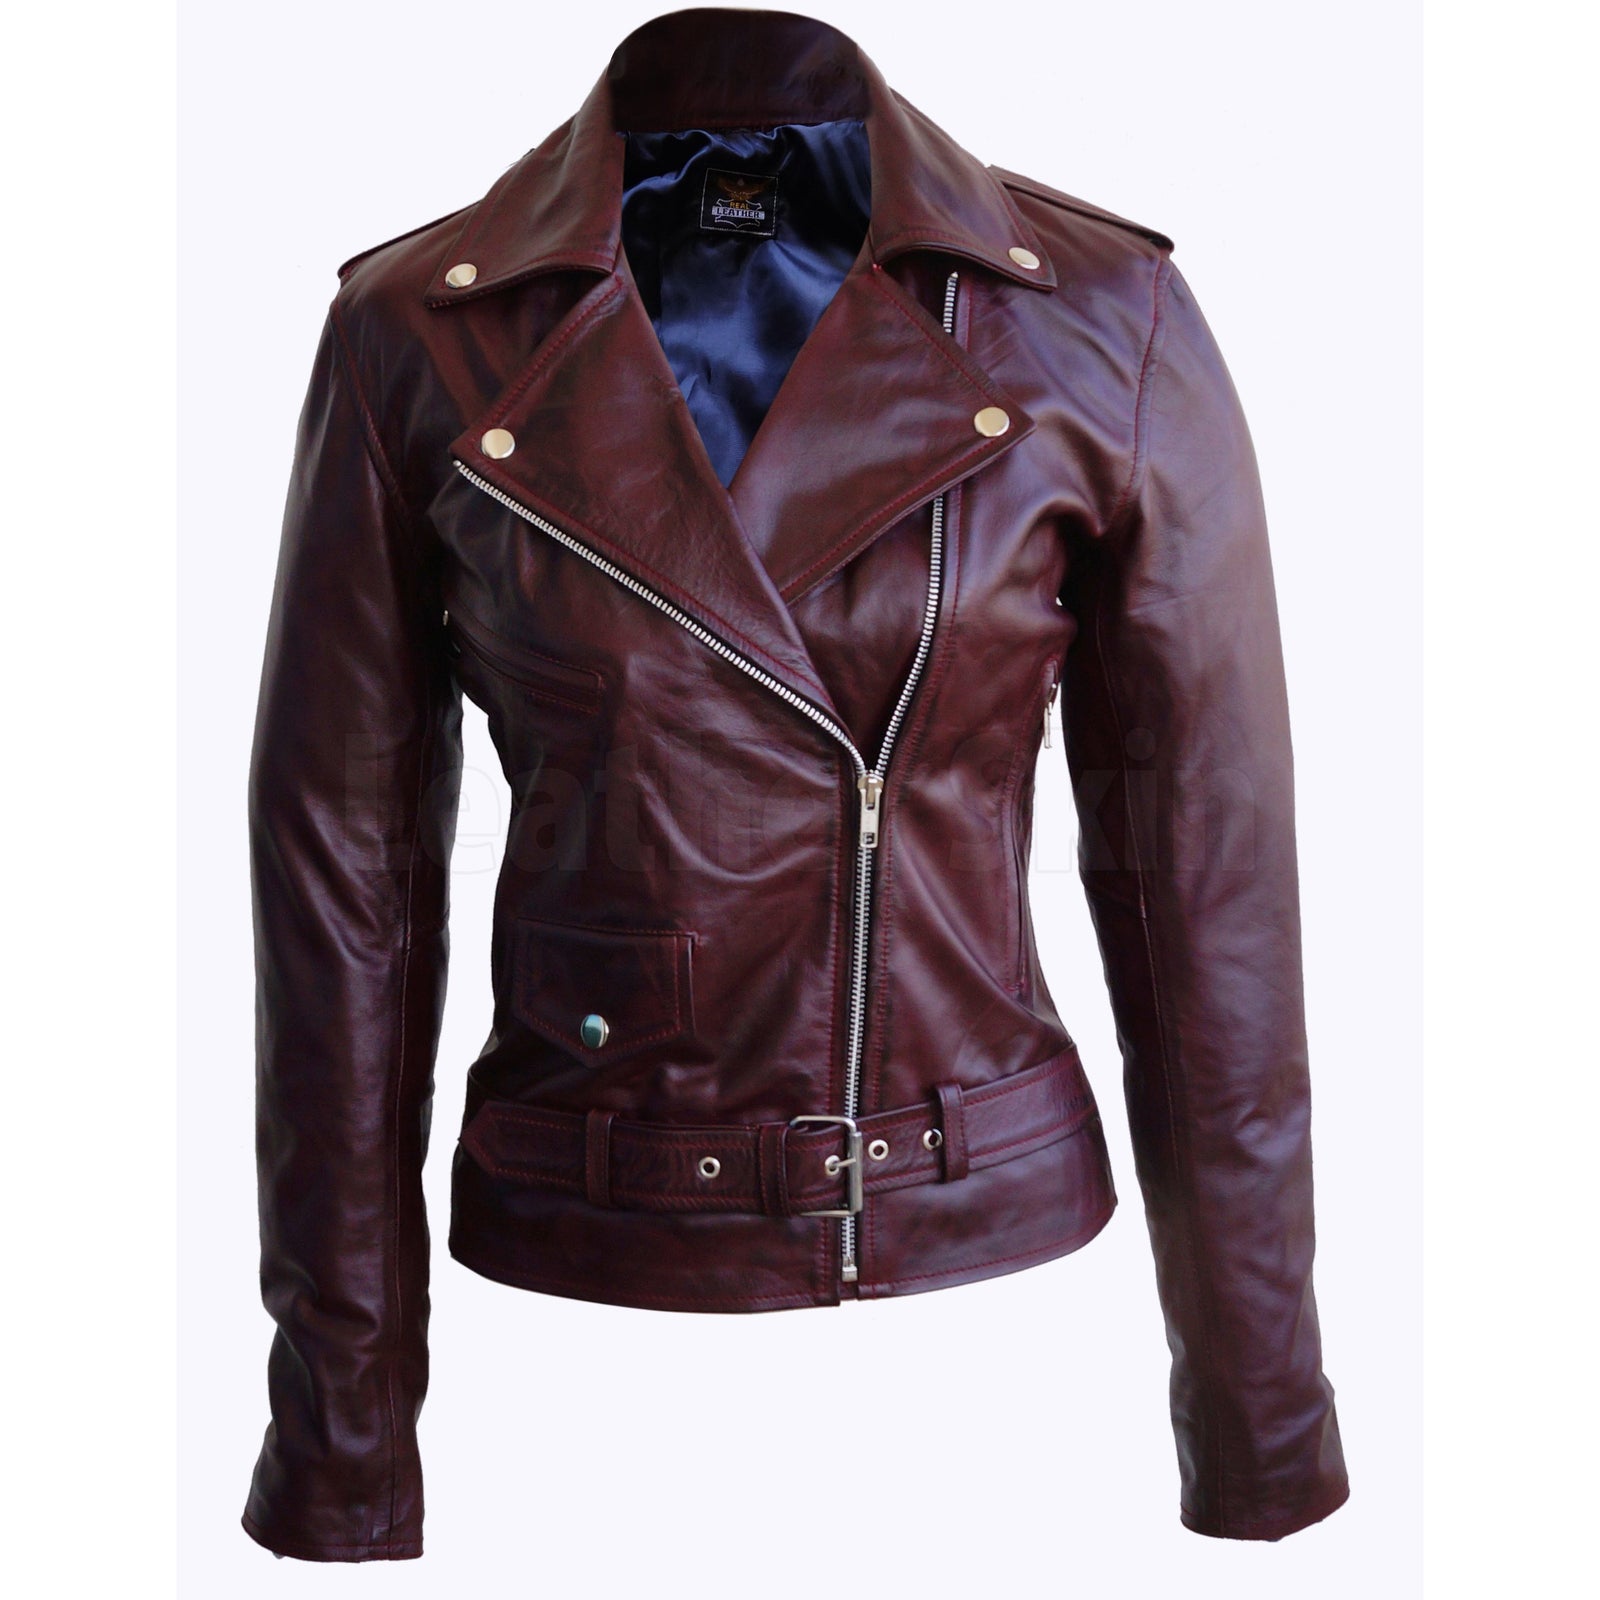 Maroon Leather Jackets - Leather Skin Shop